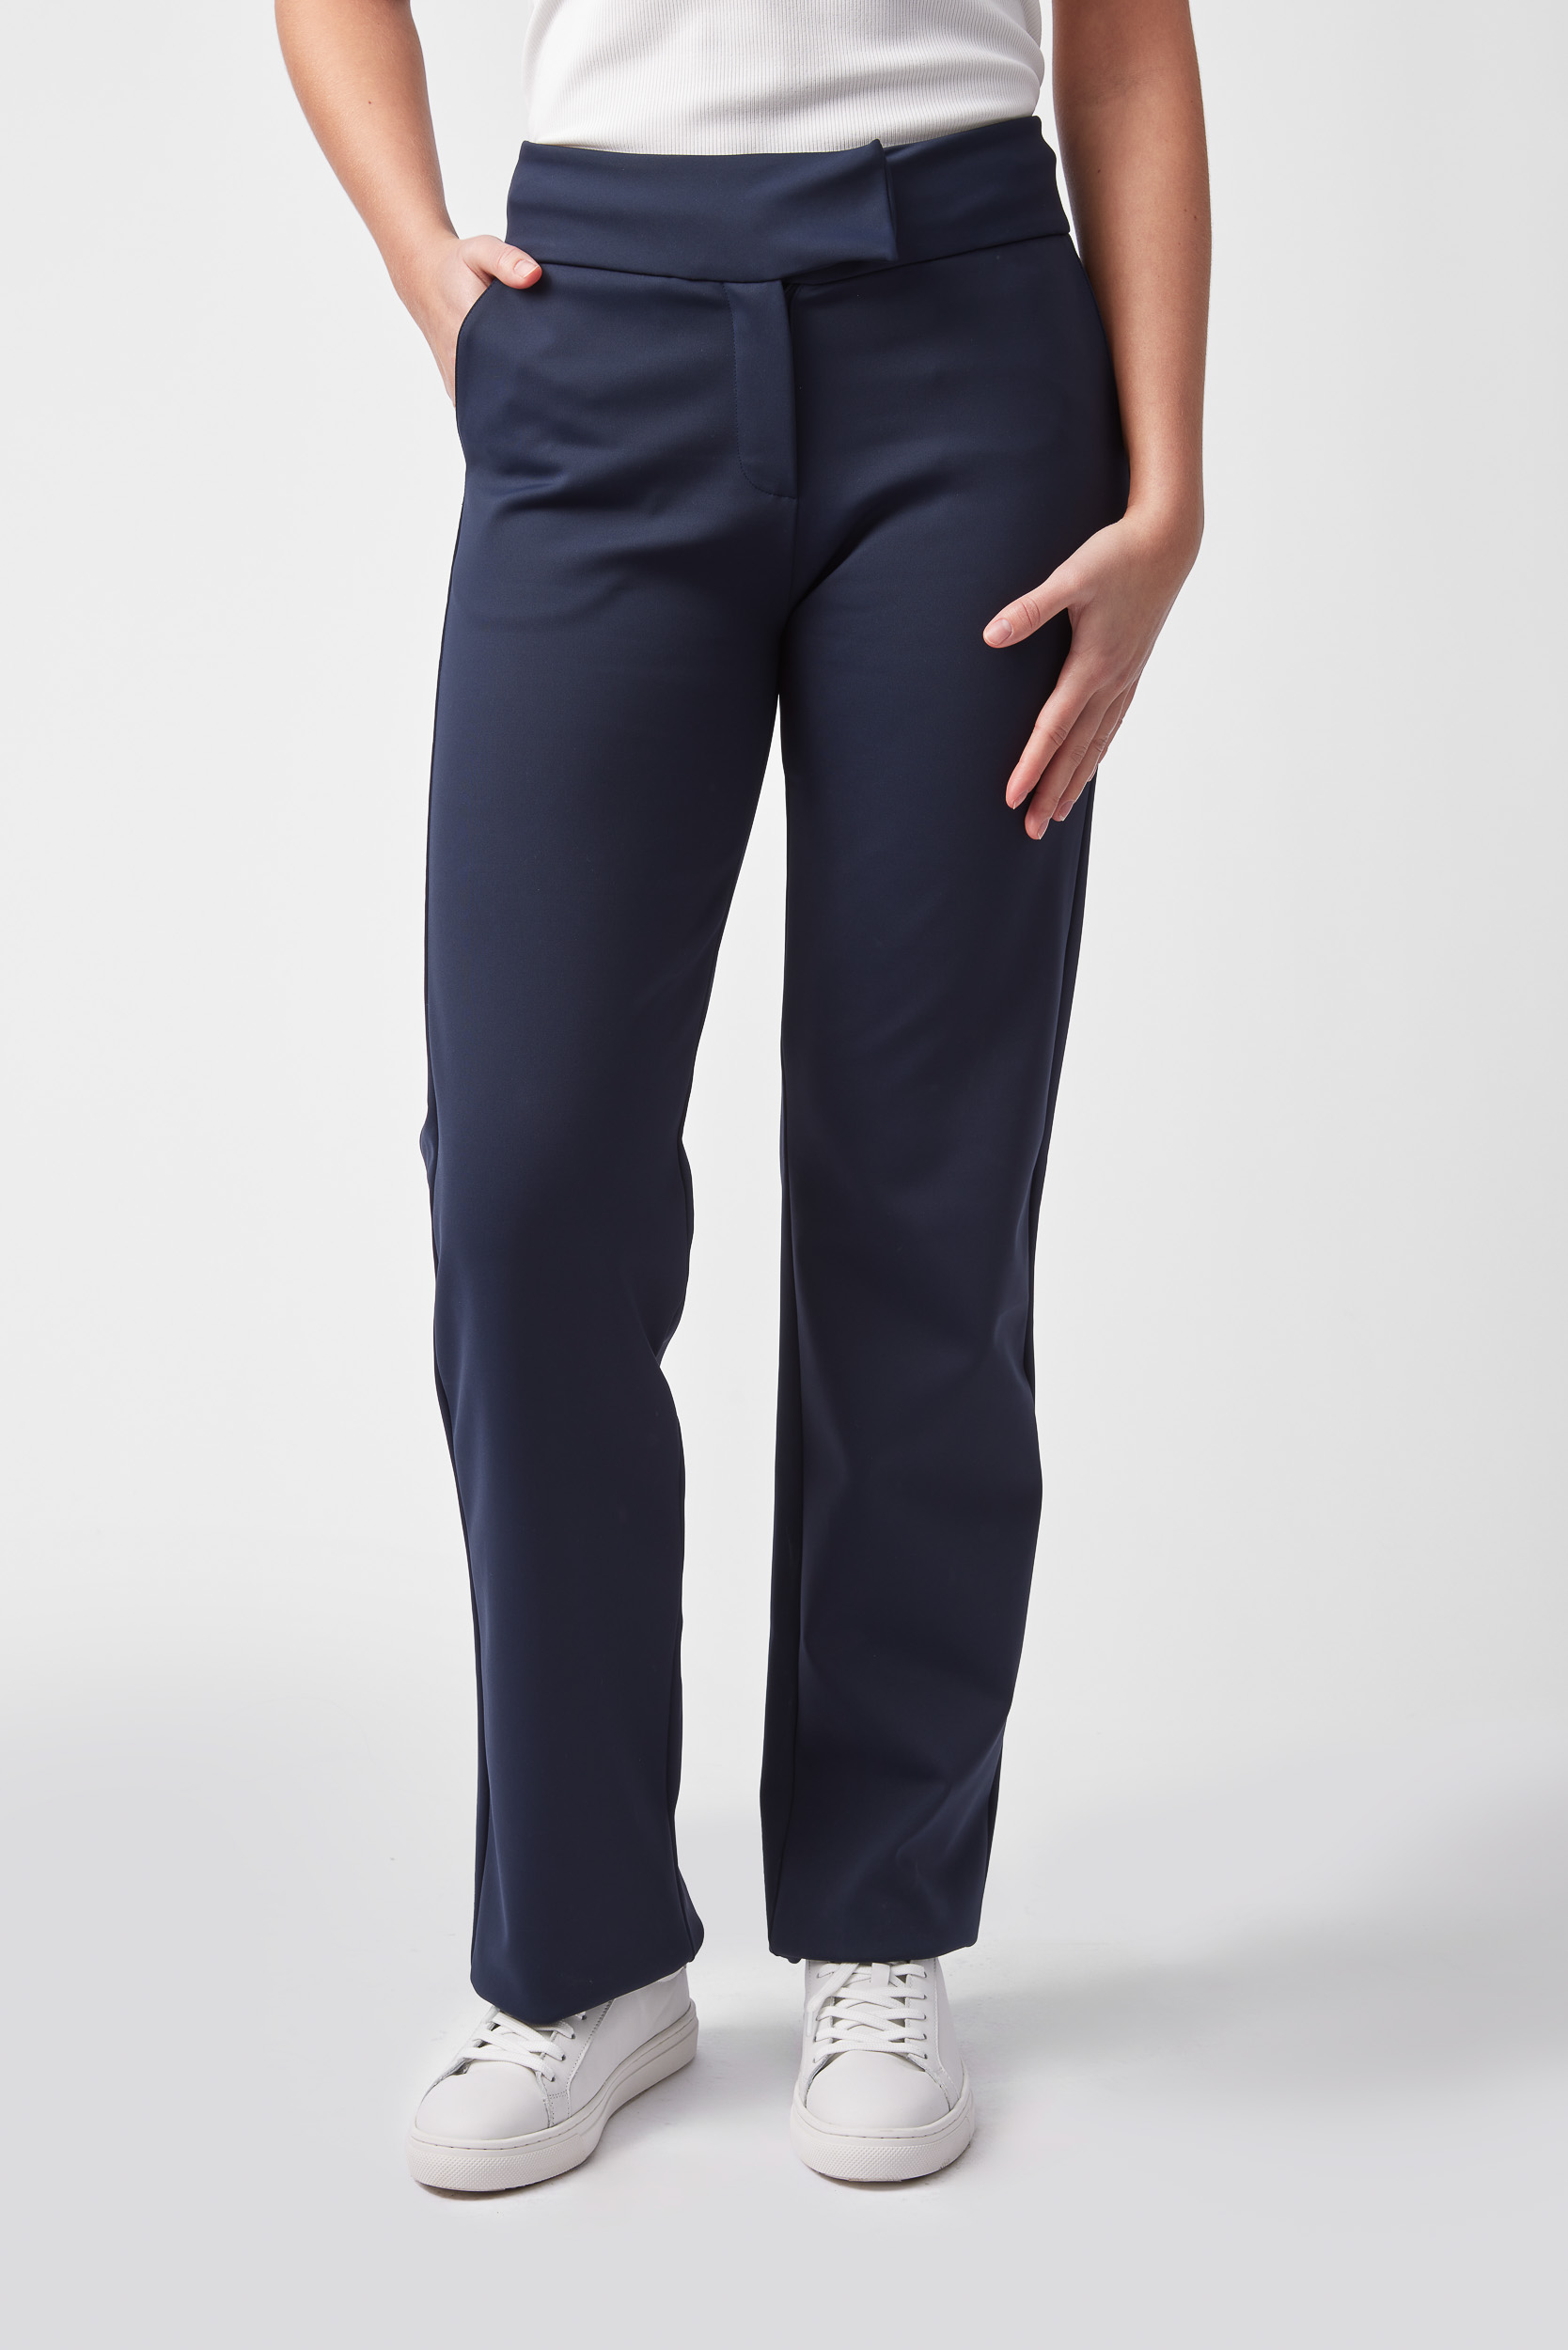 women's trousers made by oceanform